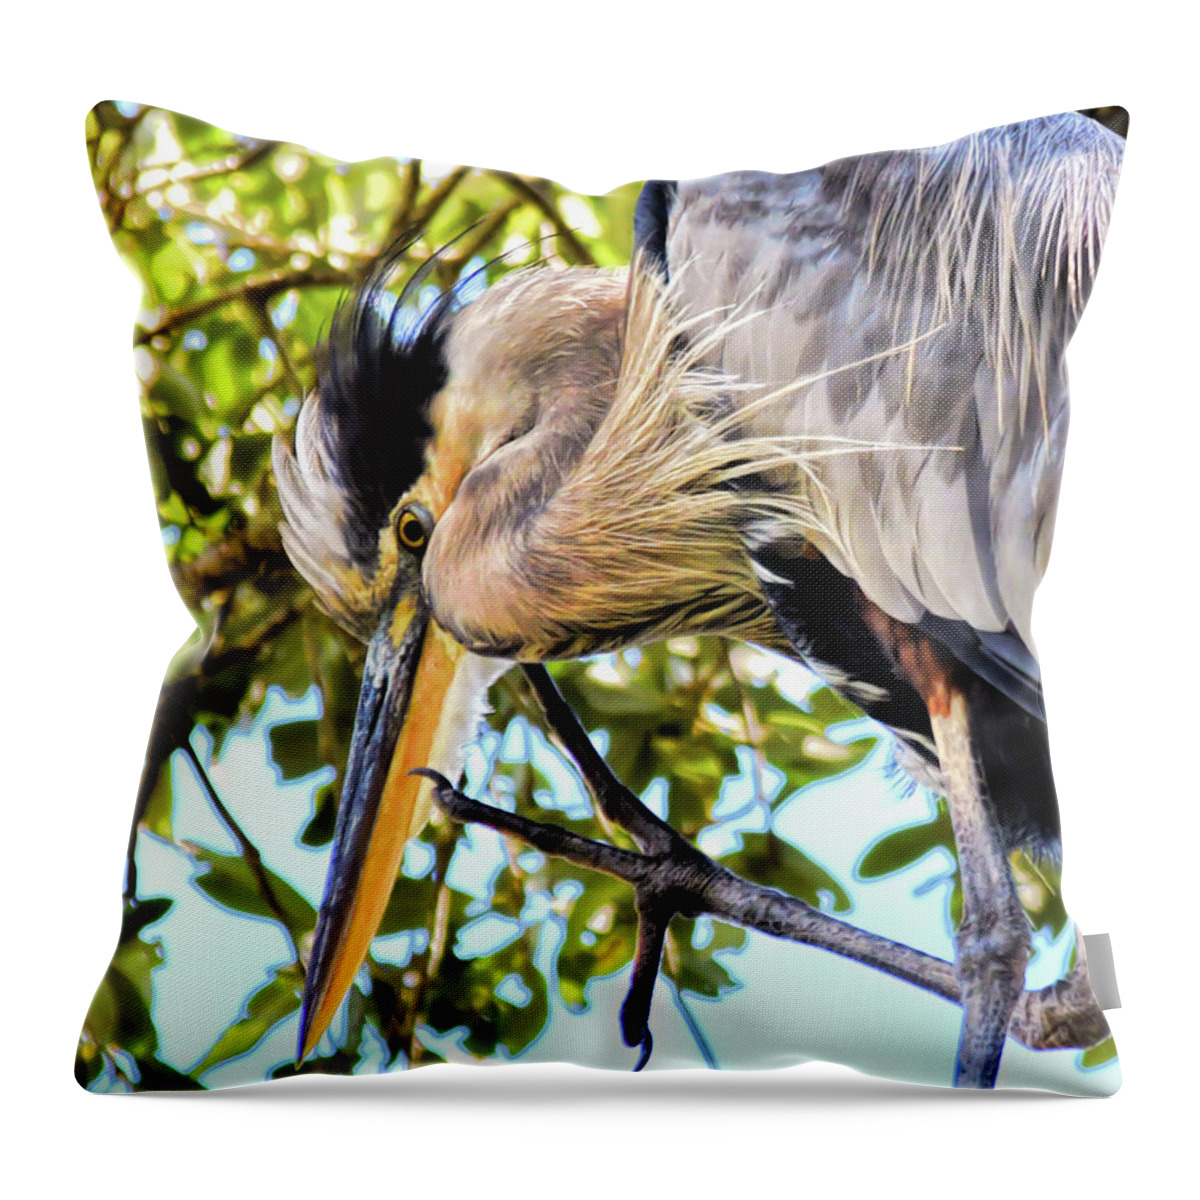 Great Blue Heron Throw Pillow featuring the photograph Great Blue Heron Close Up by Kerri Farley